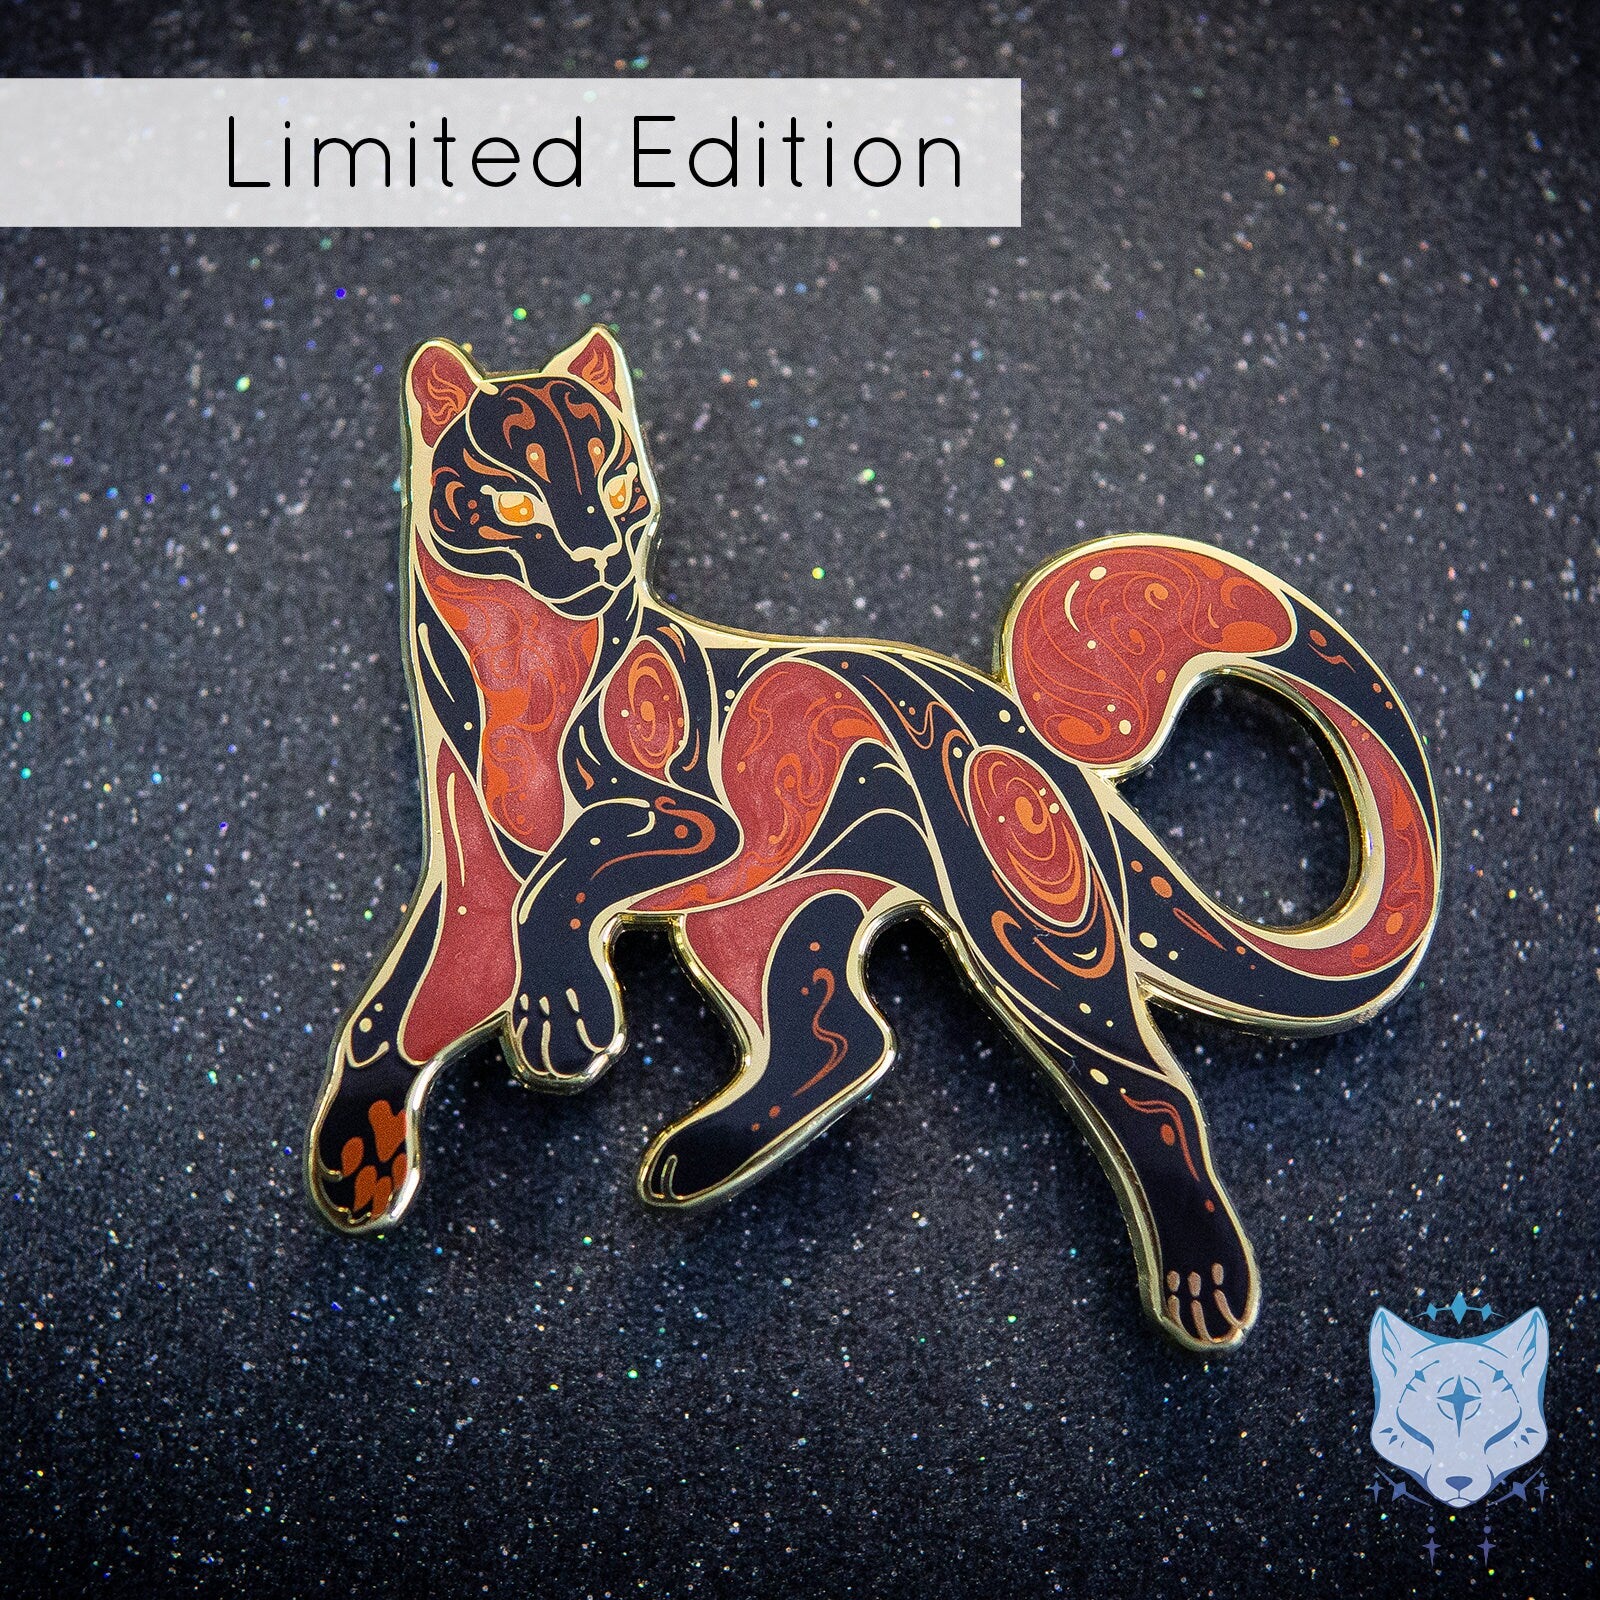 Jupiter Cat Planet Pin *LIMITED EDITION* -  69.85mm / 2.75" Space Cat enamel pin. Will not be restocked once stock is sold.